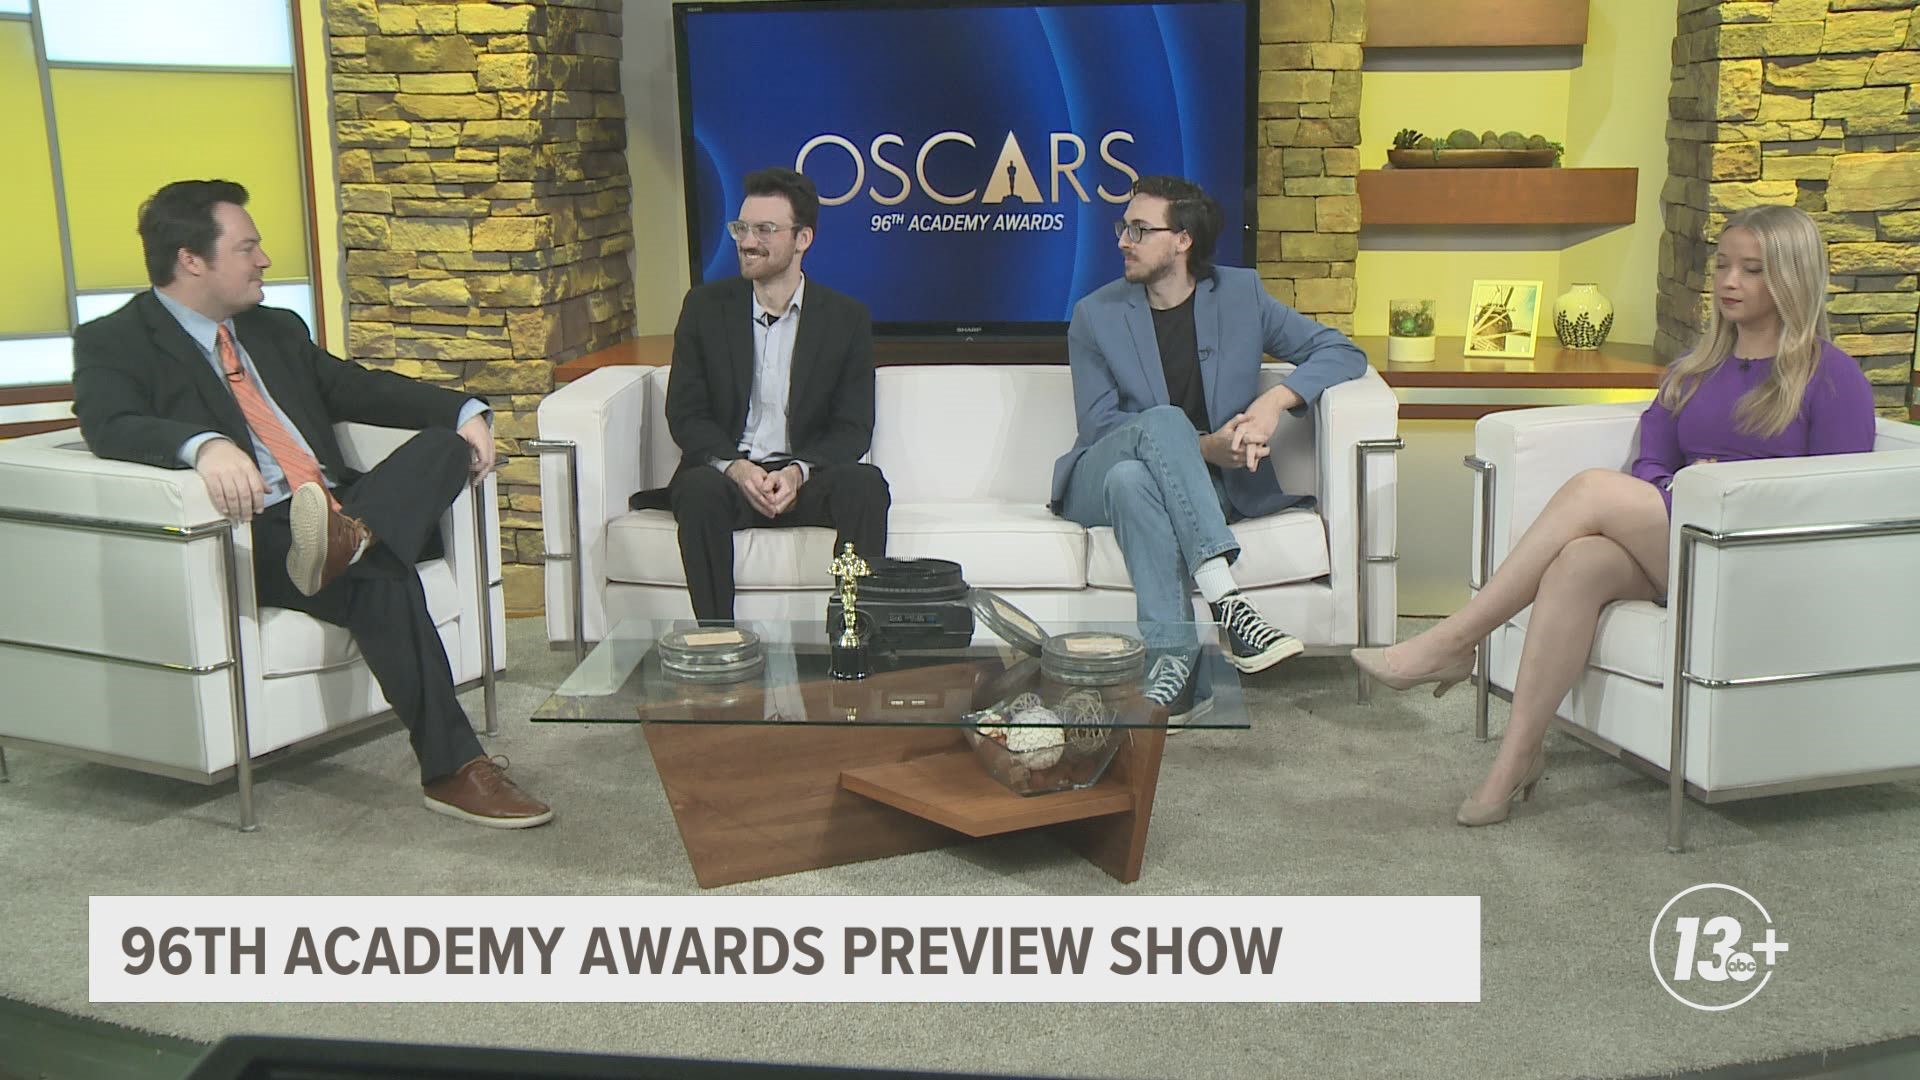 13 ON YOUR SIDE's Nate Belt, Julie Koharik and Erik Howard are joined by Kyle Macciomei to share their predictions for some of the 96th Oscars categories.